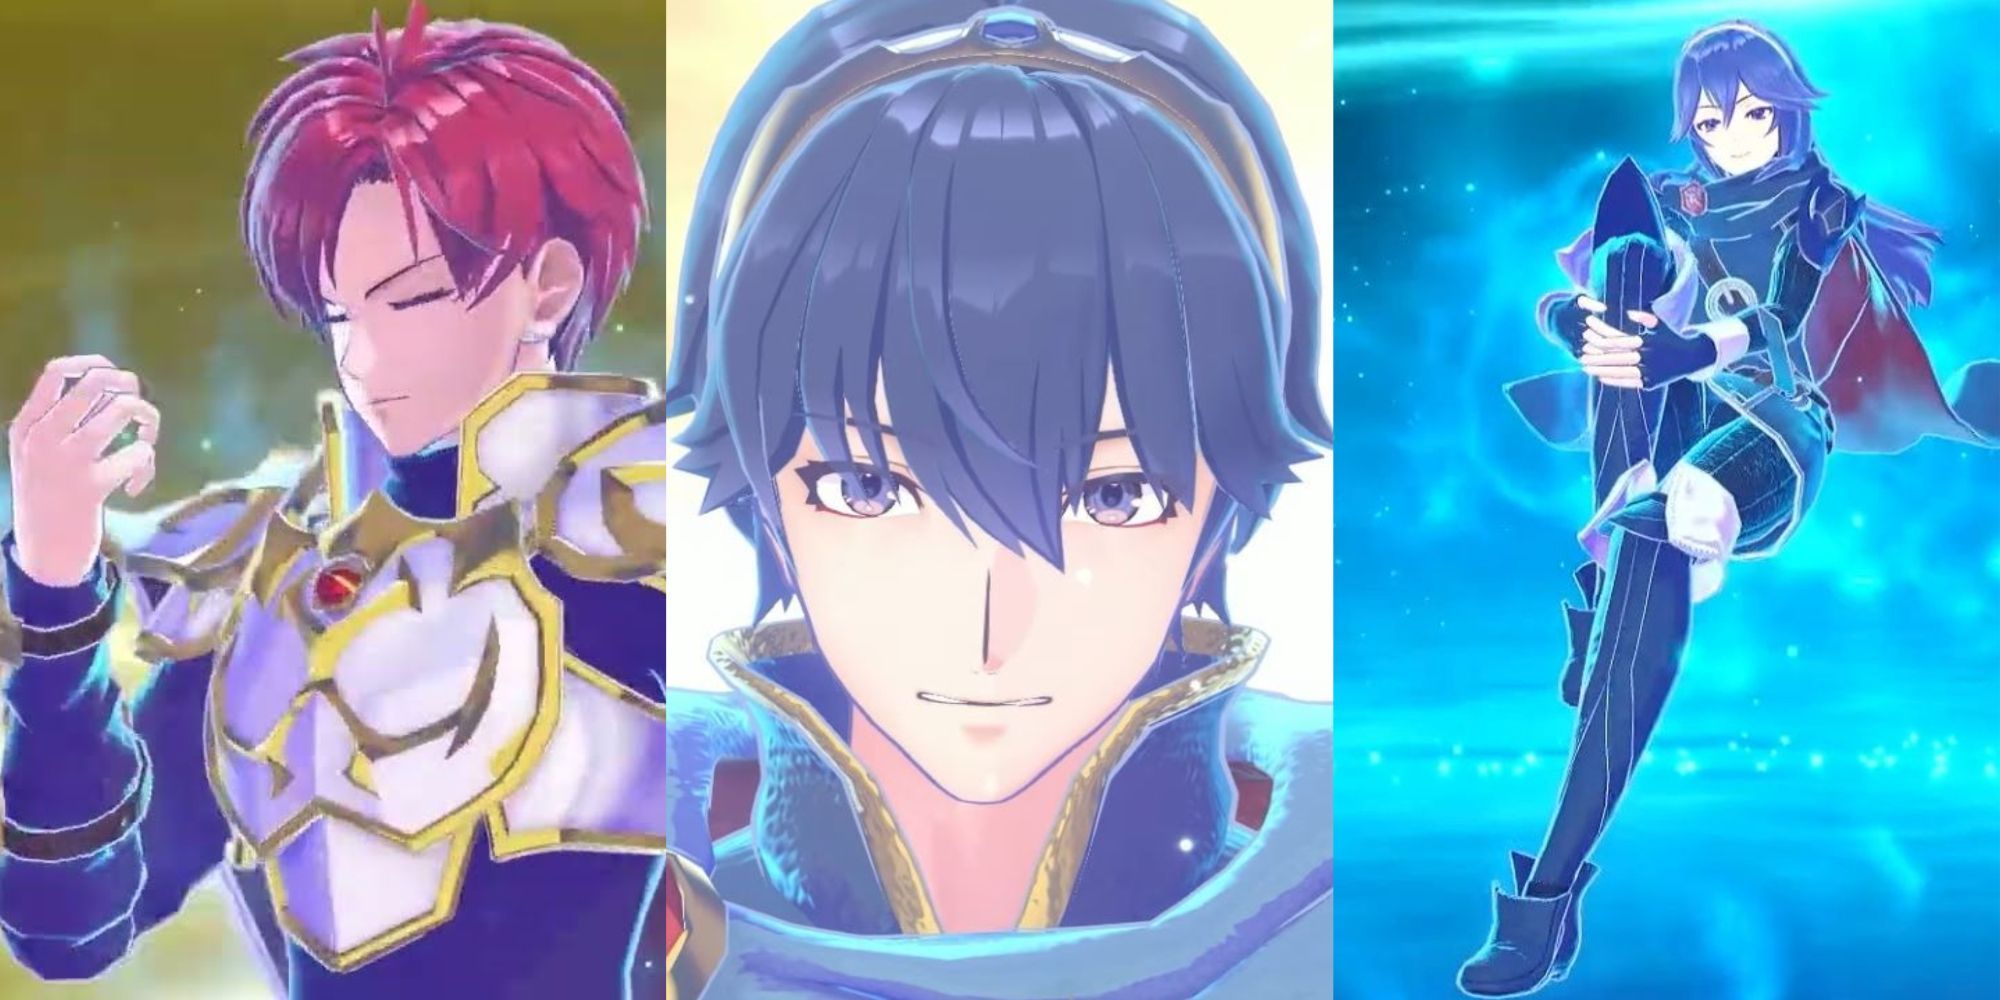 Fire Emblem Engage paralogues - Leif, Marth, and Lucina in cutscenes.